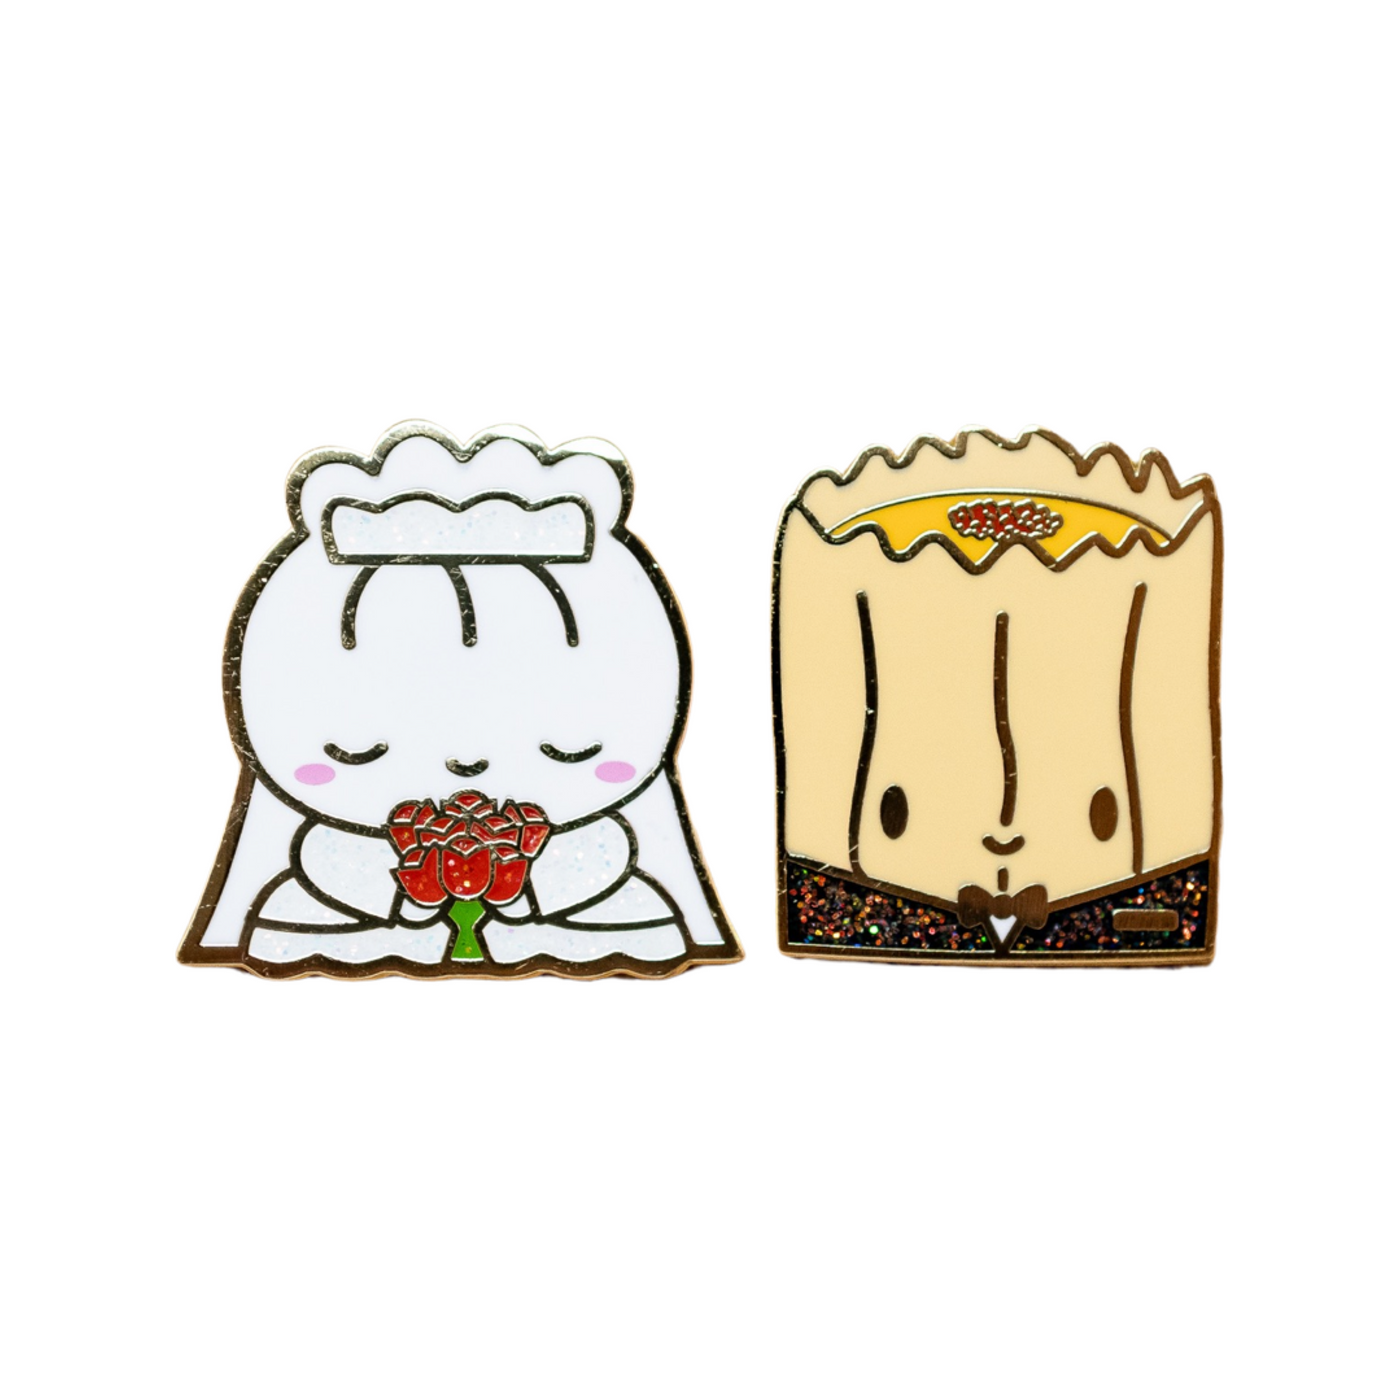 PINS008 | Wedding Steamie and Suey Bride and Groom Pins (Set of 2)